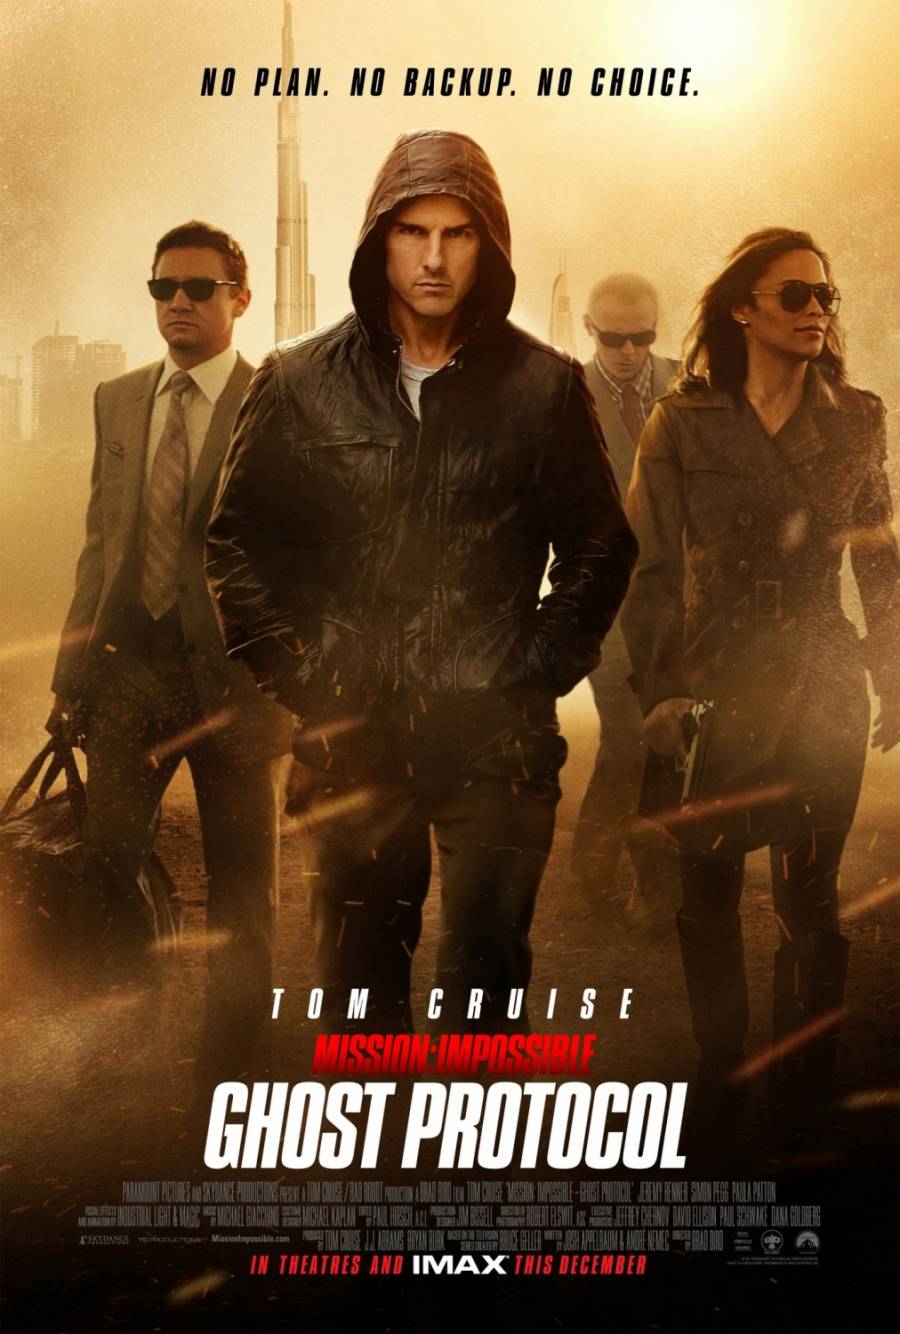 Mission: Impossible 5 movie